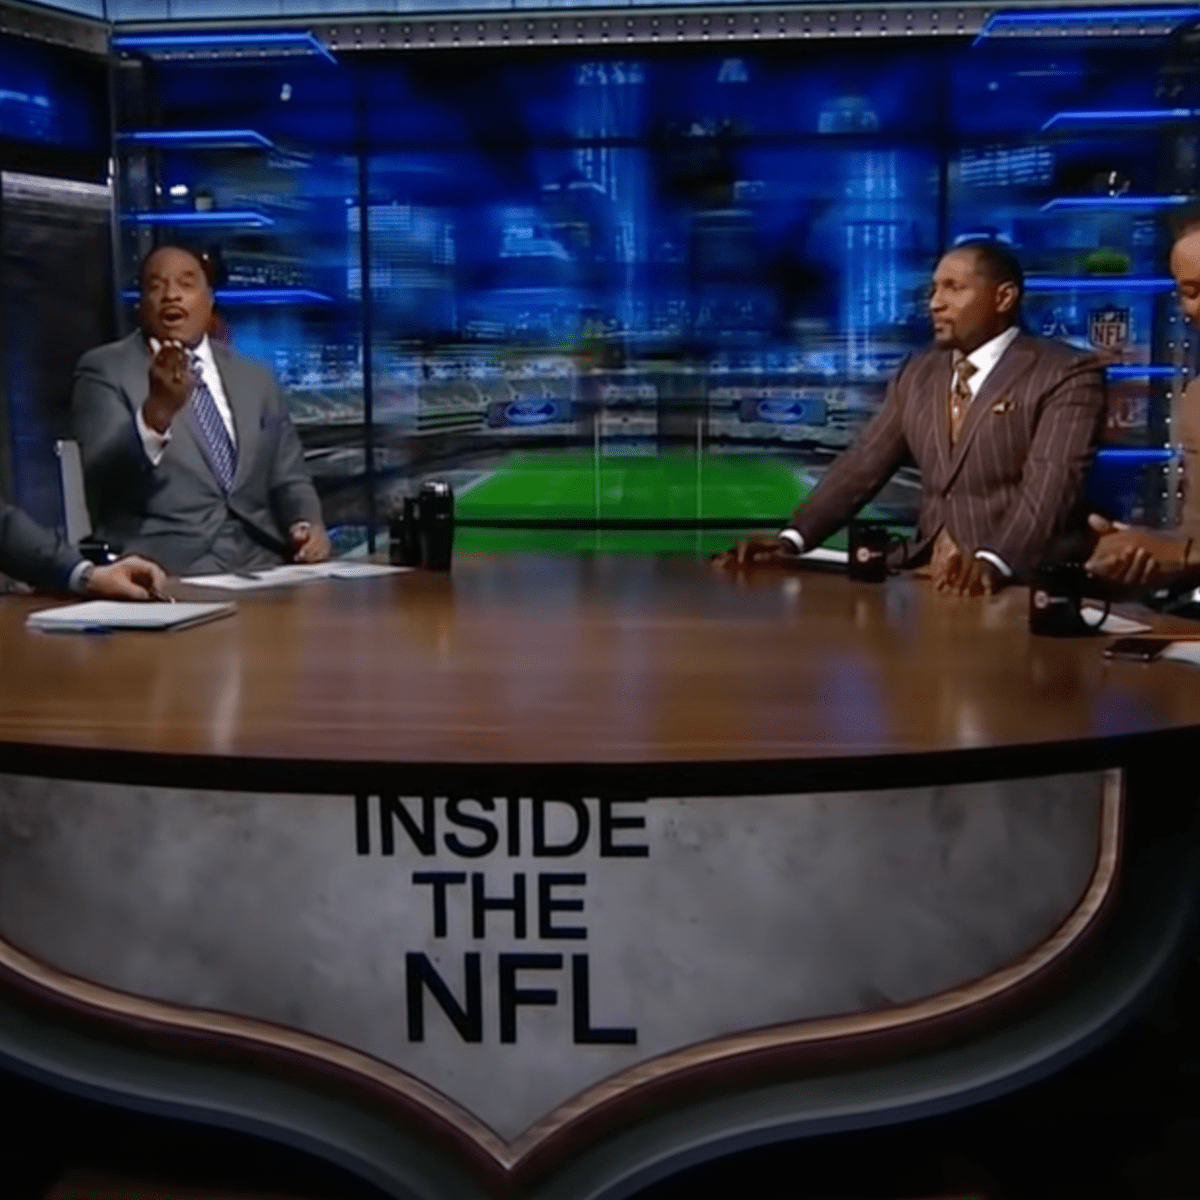 the nfl today television show